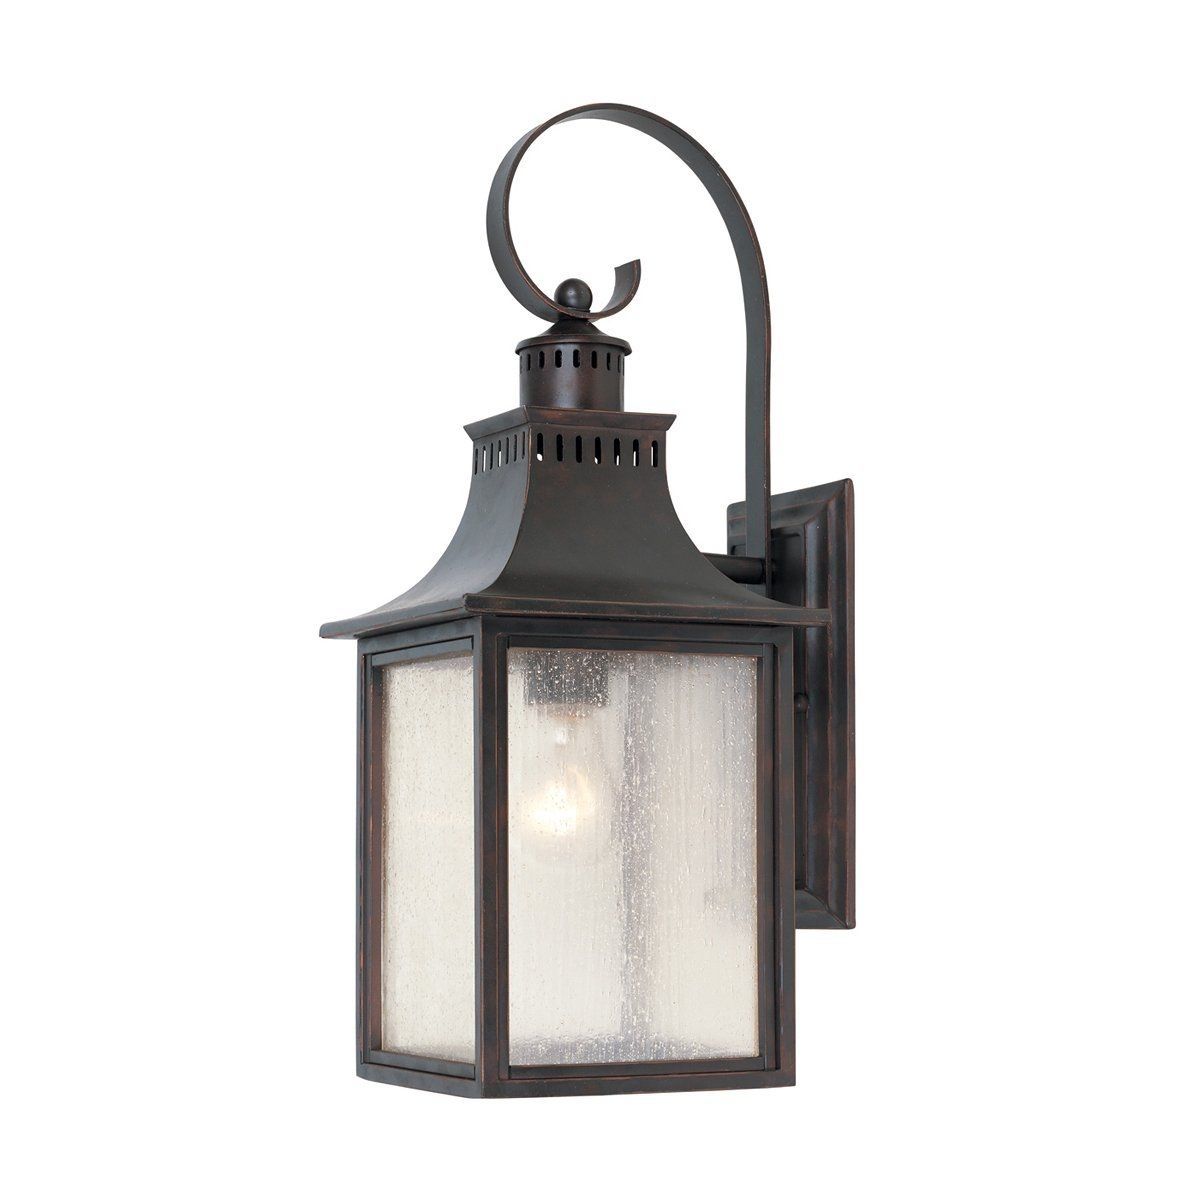 Savoy House 5 258 Monte Grande Small Outdoor Sconce At Atg Stores With Outdoor Wall Lighting At Houzz (View 11 of 15)